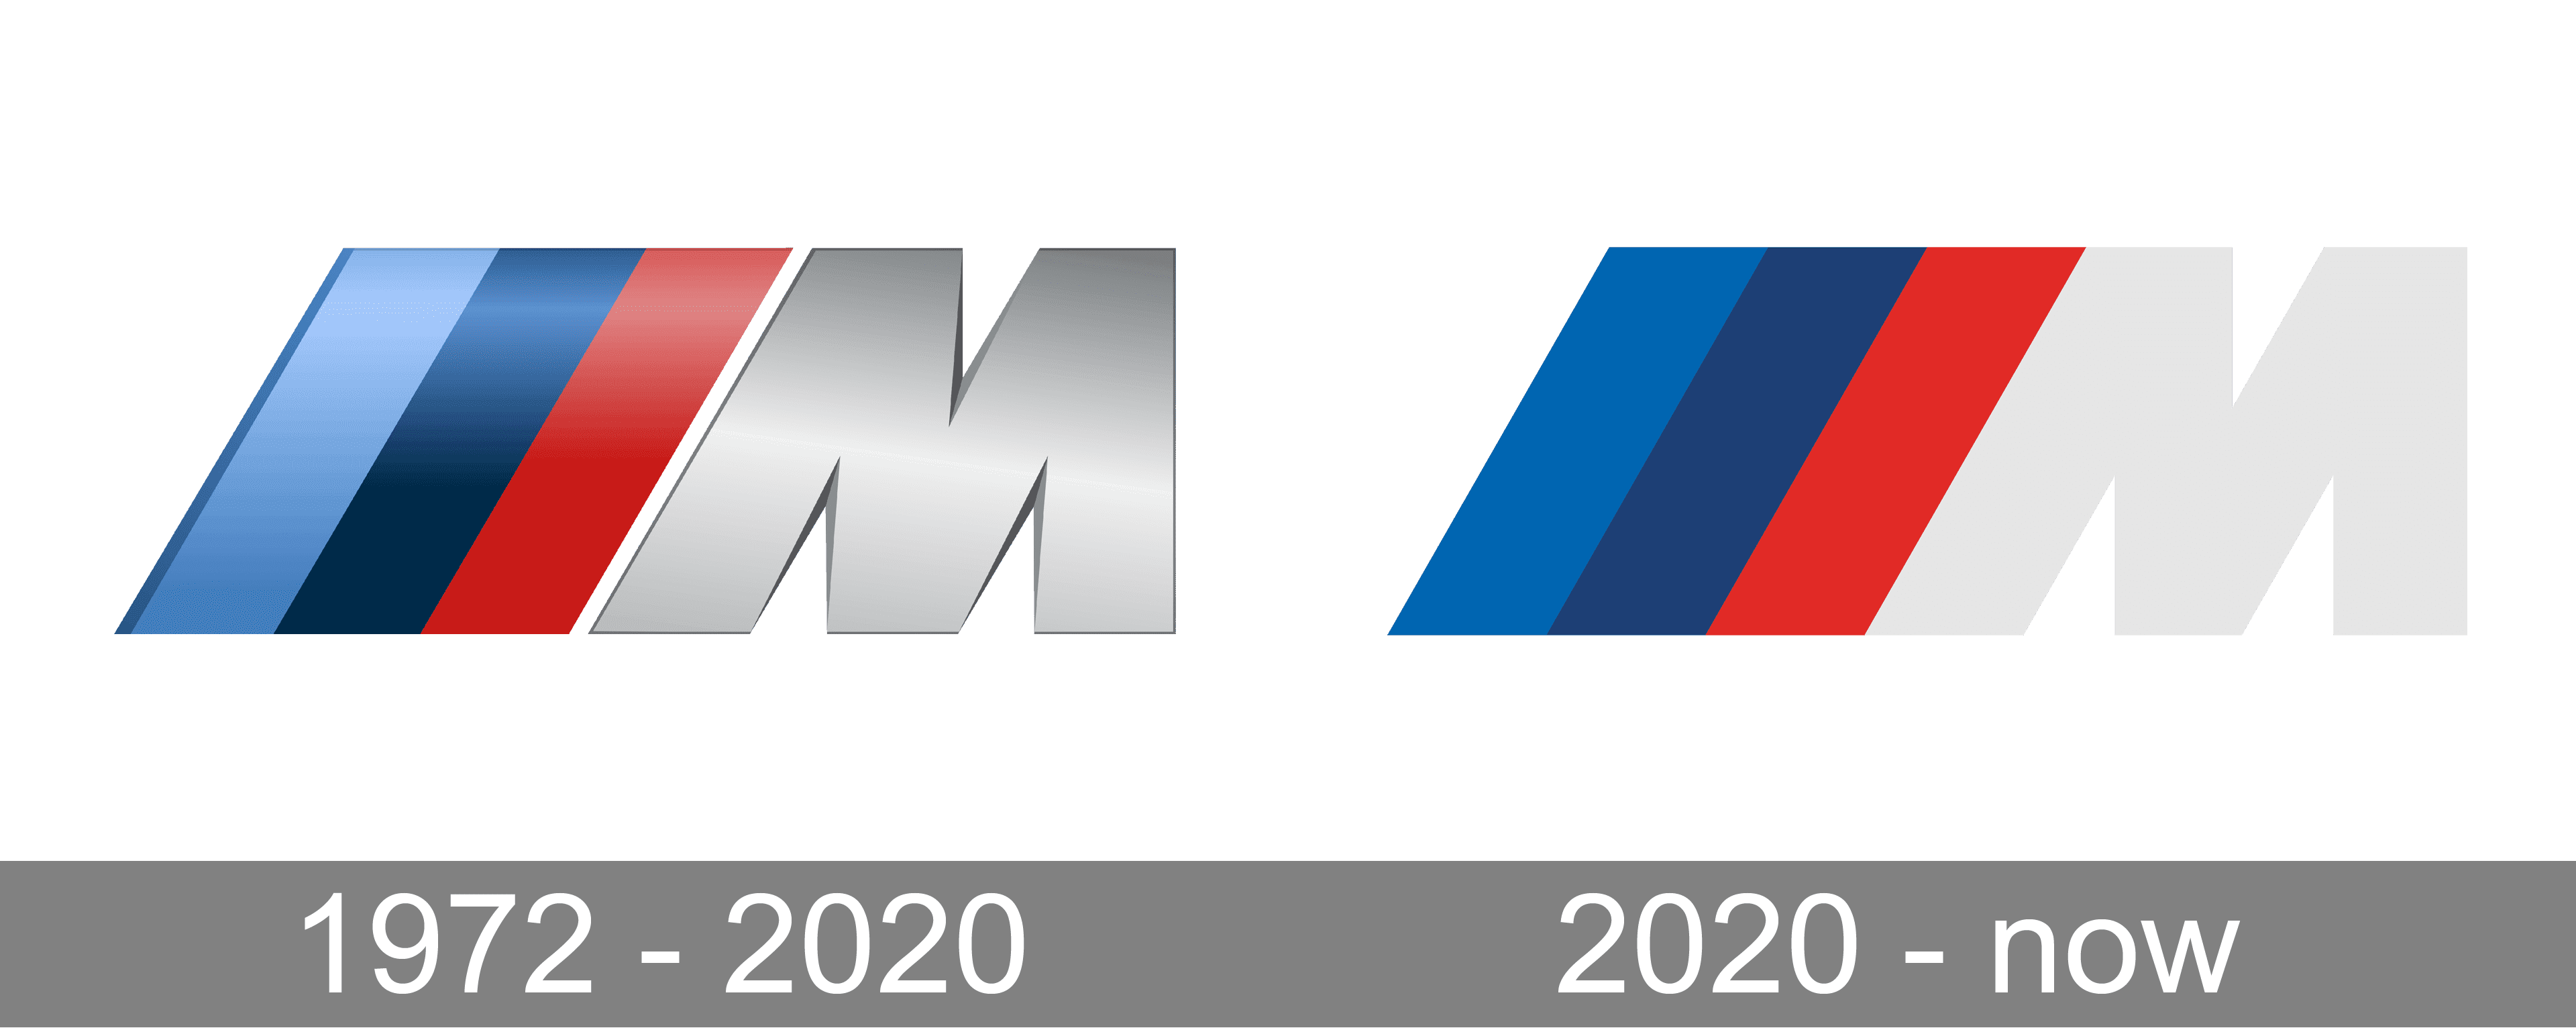 The history of the BMW M logo and its colors